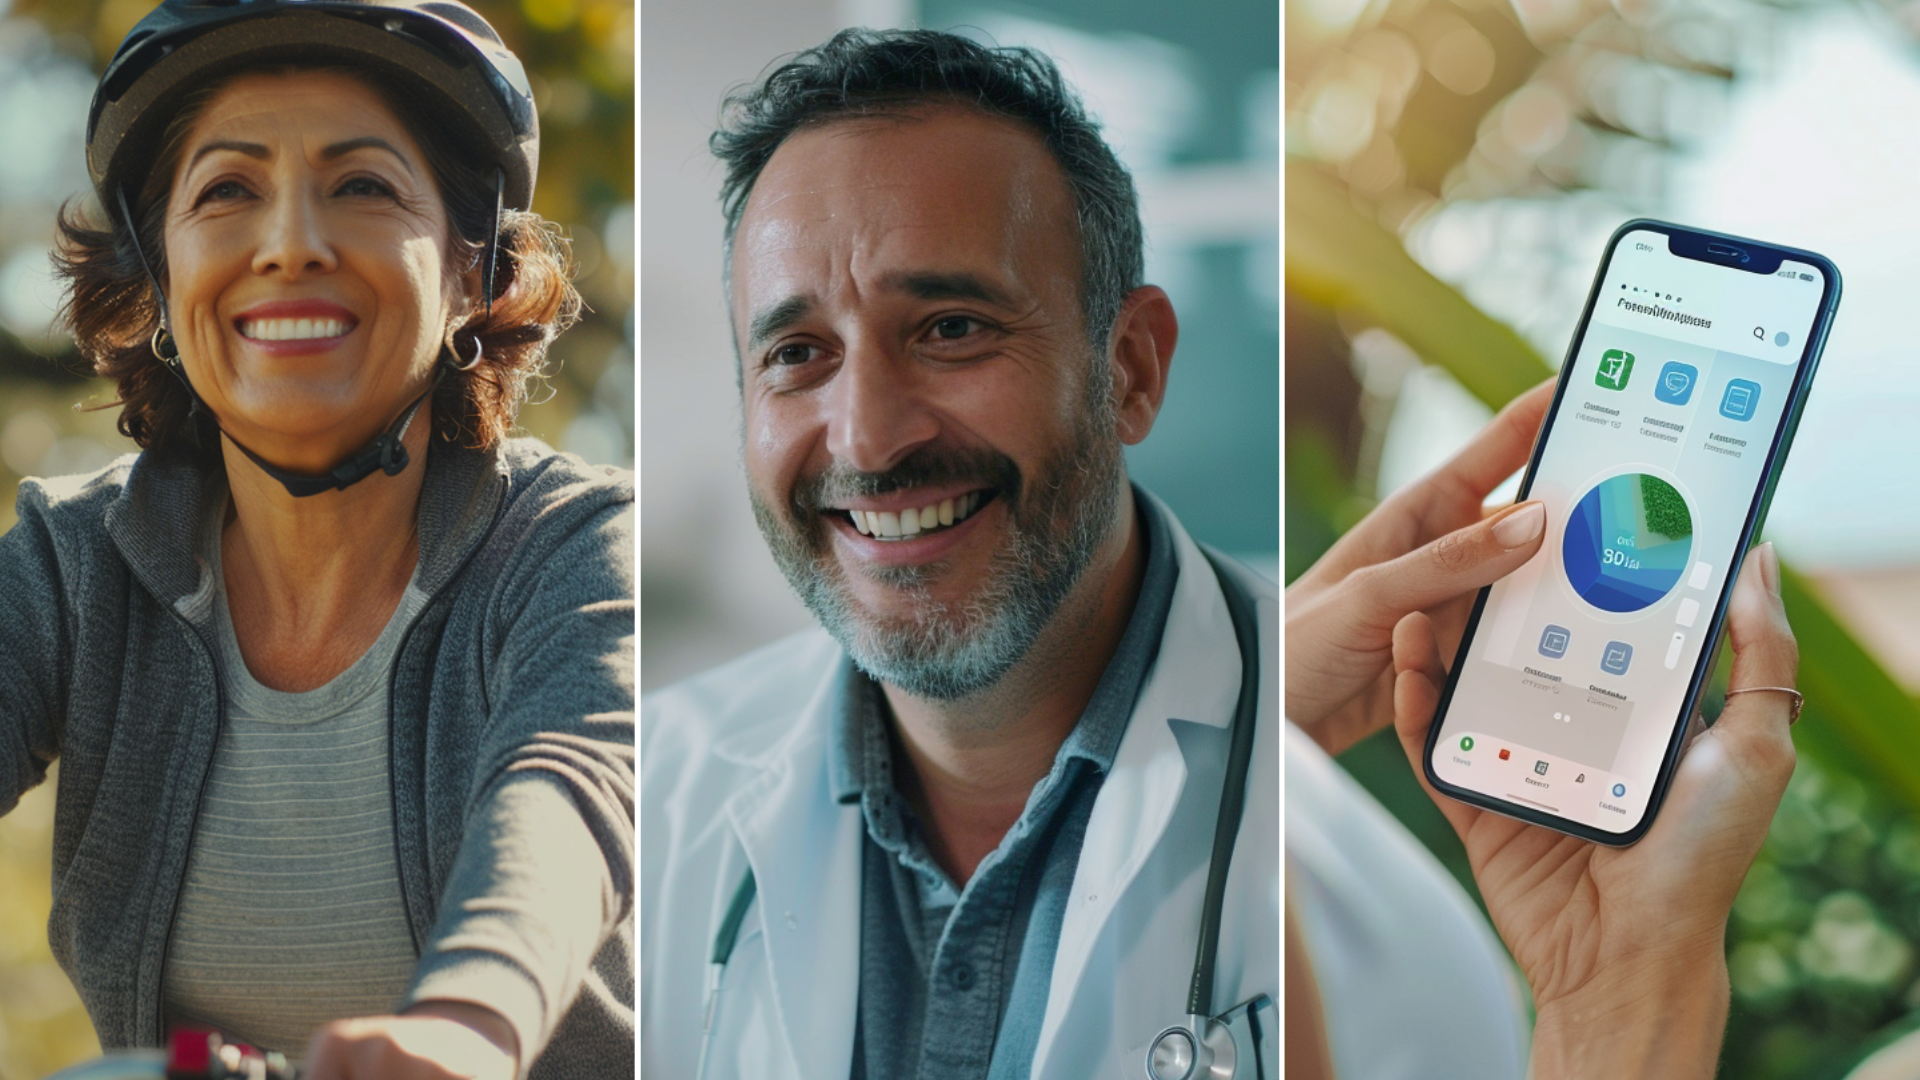 A 40-year-old male doctor in a consultation room, sitting face-to-face with a patient, captures a smiling face, giving fitness recommendations to lose weight. woman hand-holding phone with a weight loss app interface. Middle age Hispanic woman riding a bike with friends in the park.